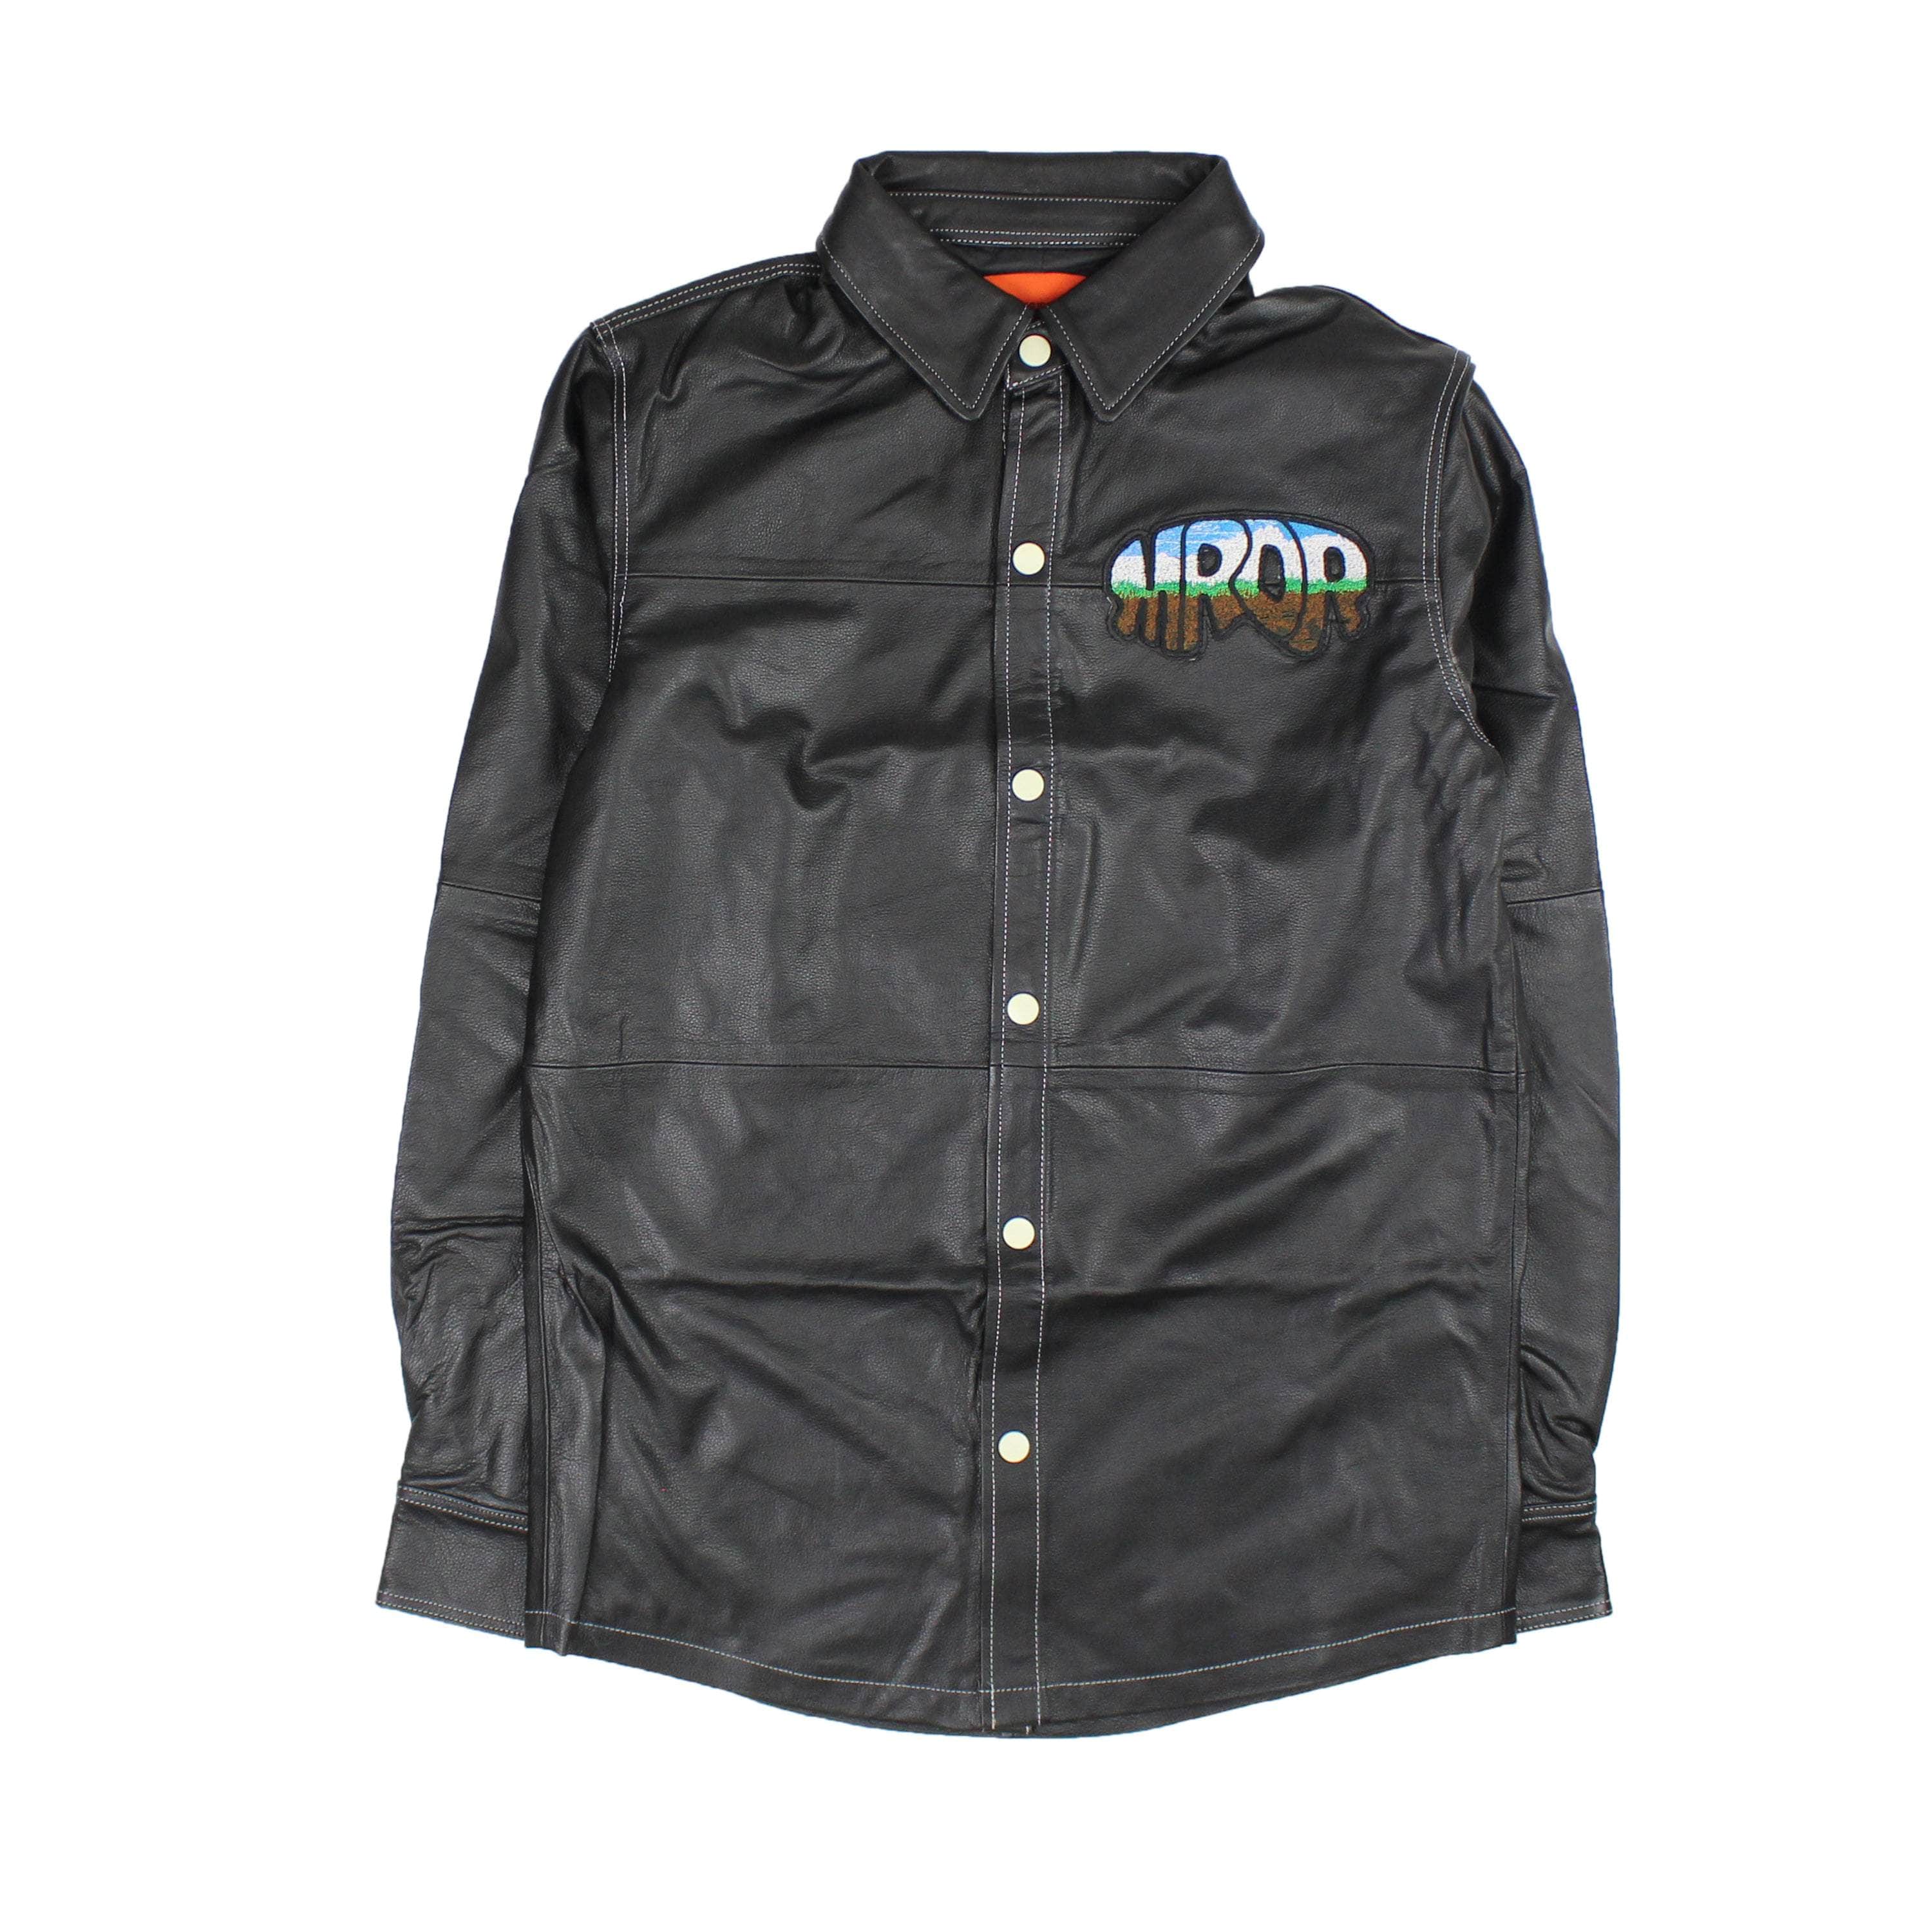 Who Decides War couponcollection, gender-mens, main-clothing Mrdr Leather Work Shirt